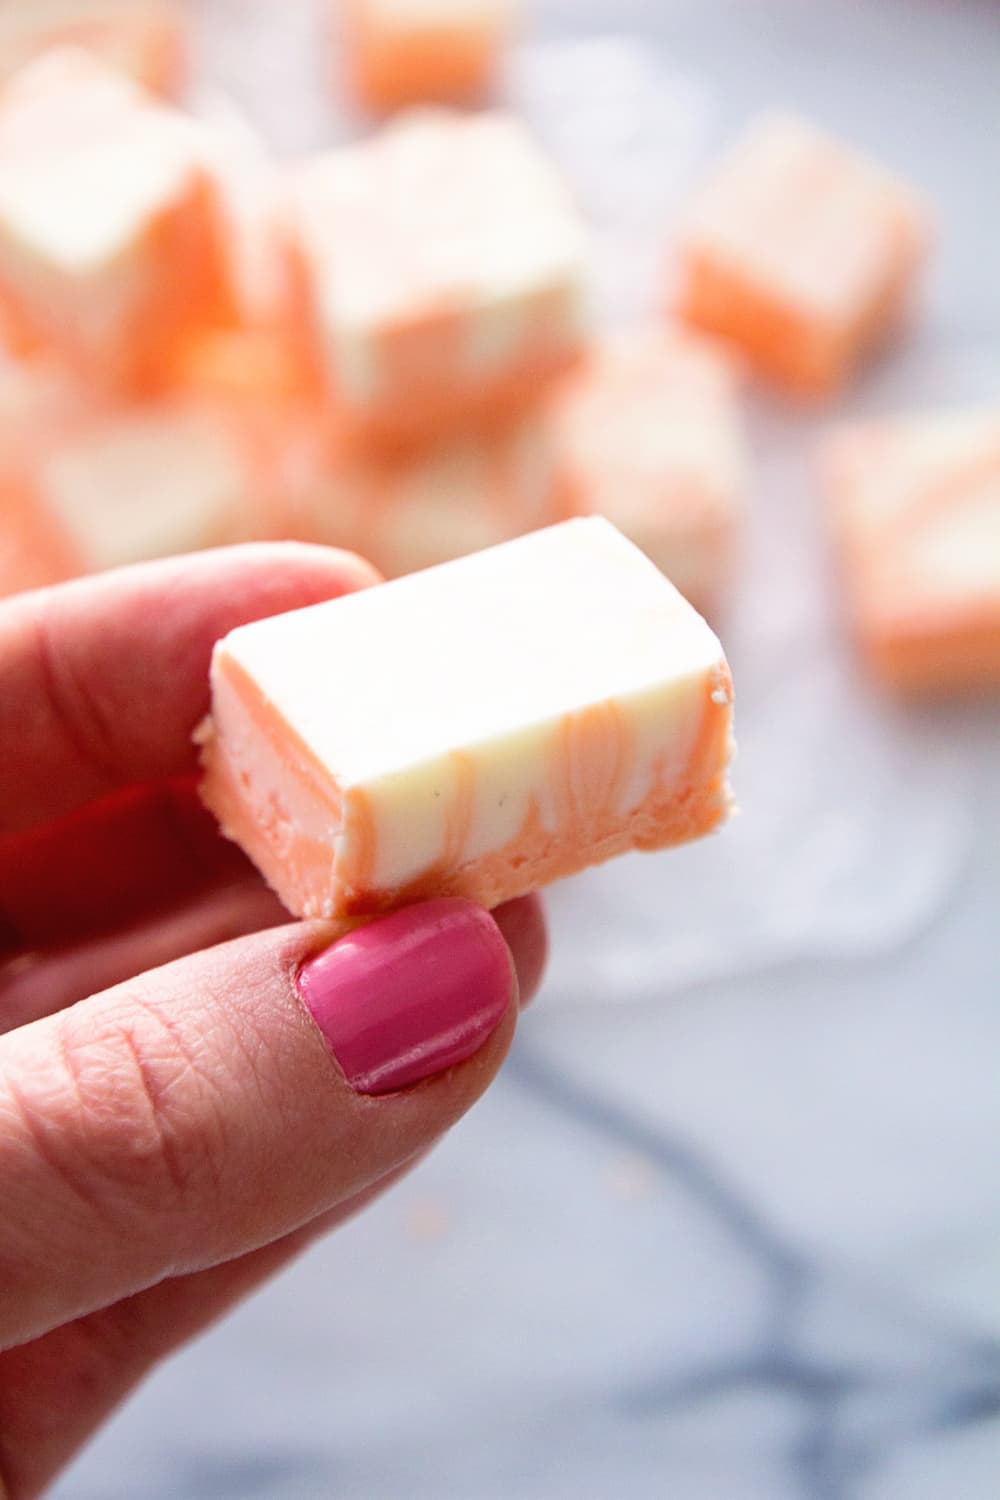 Easy Orange Creamsicle Fudge ~ This Fool Proof Fudge will have everyone thinking you slaved over it! Super Yksinkertainen, Sileä, Kermainen Toffee!